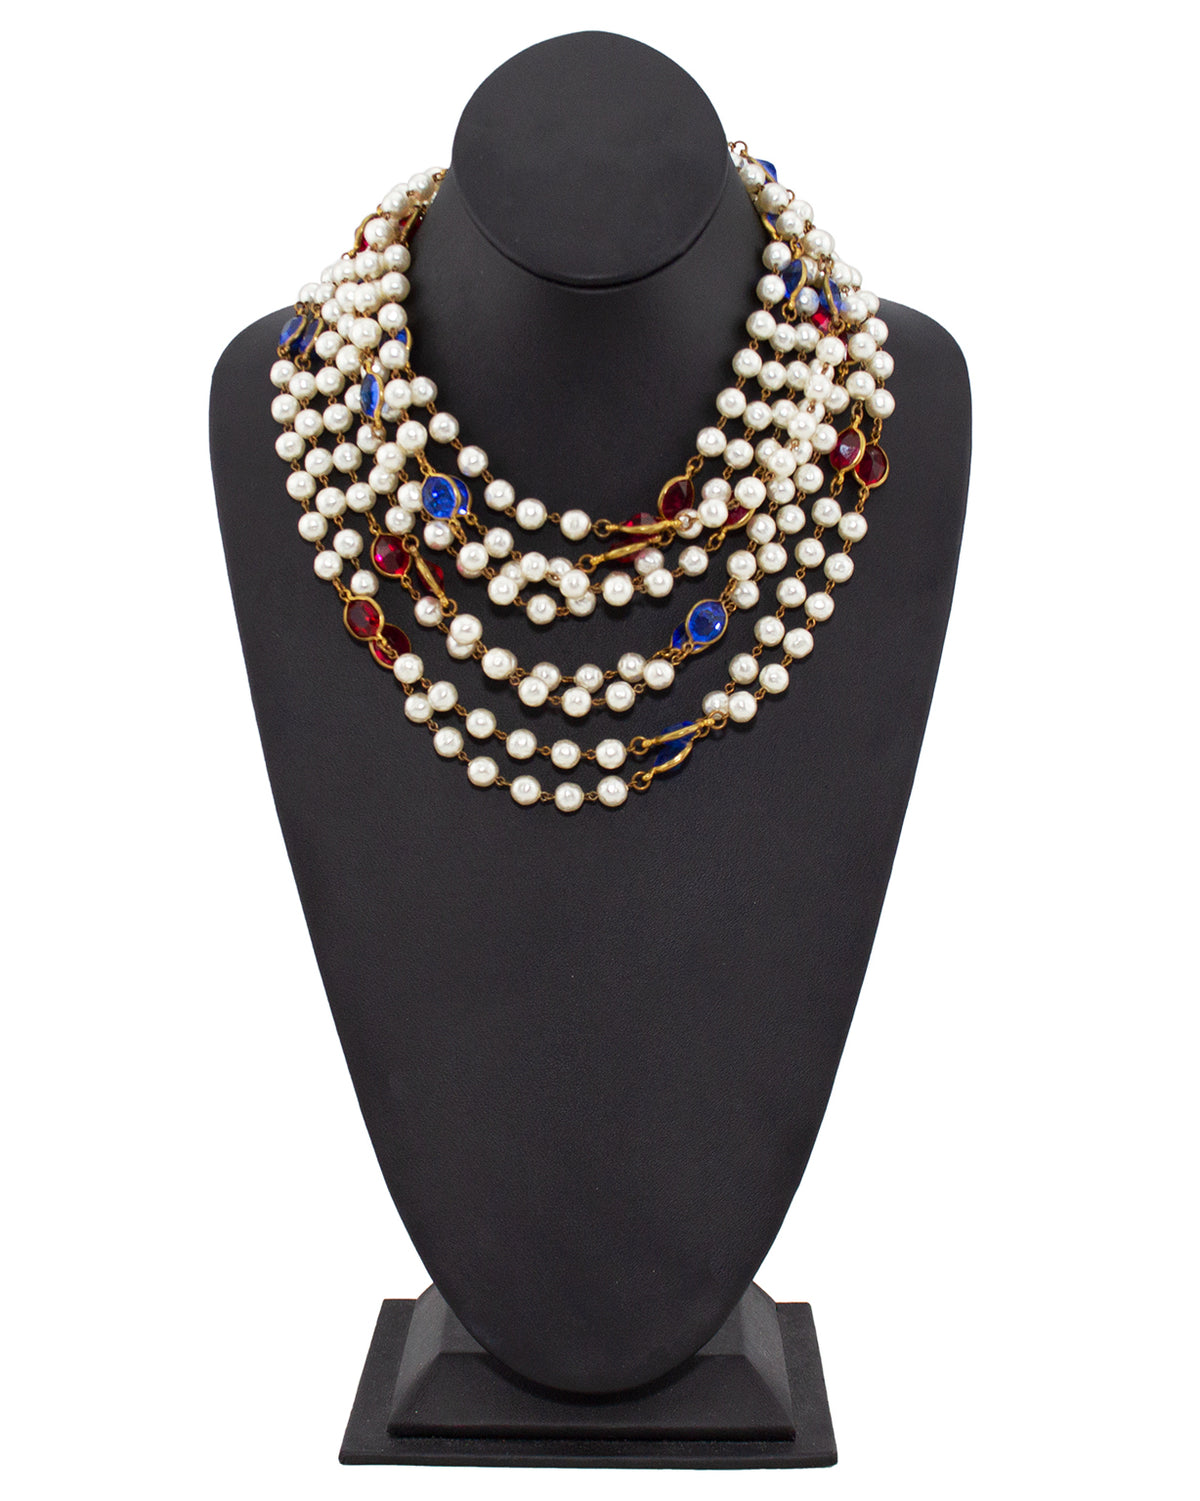 Chanel Paris 1980’s Byzantine Style Extra Long Pearl Sautoir Necklace